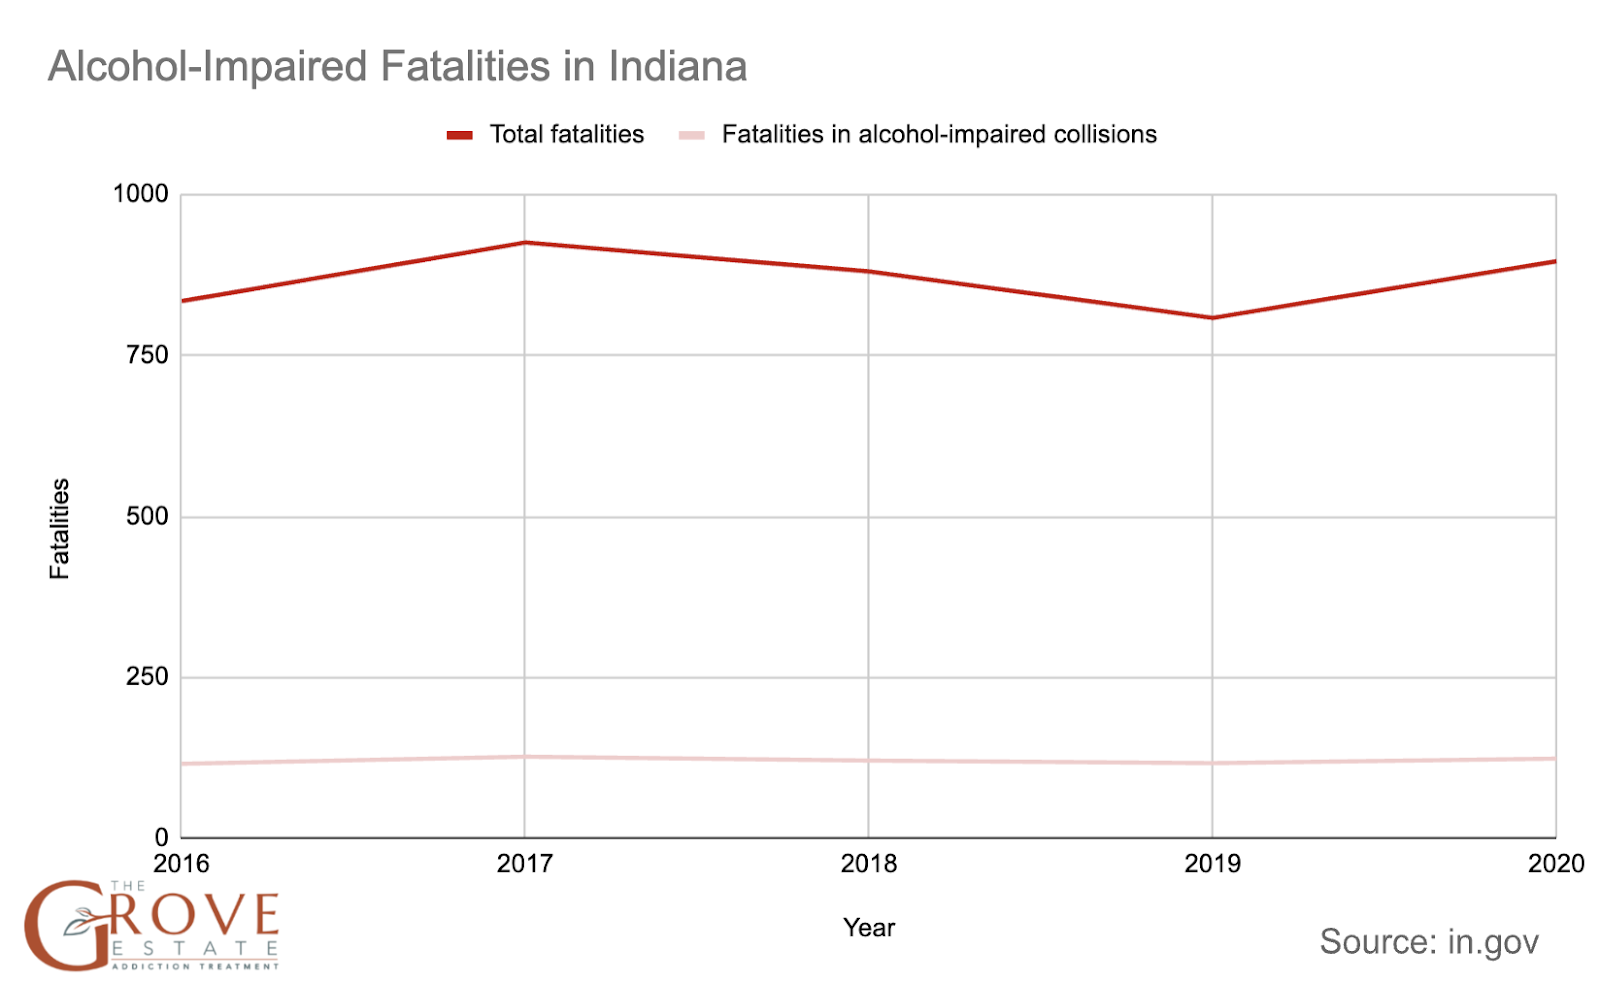 Alcohol-Imparied Fatalities in Indiana